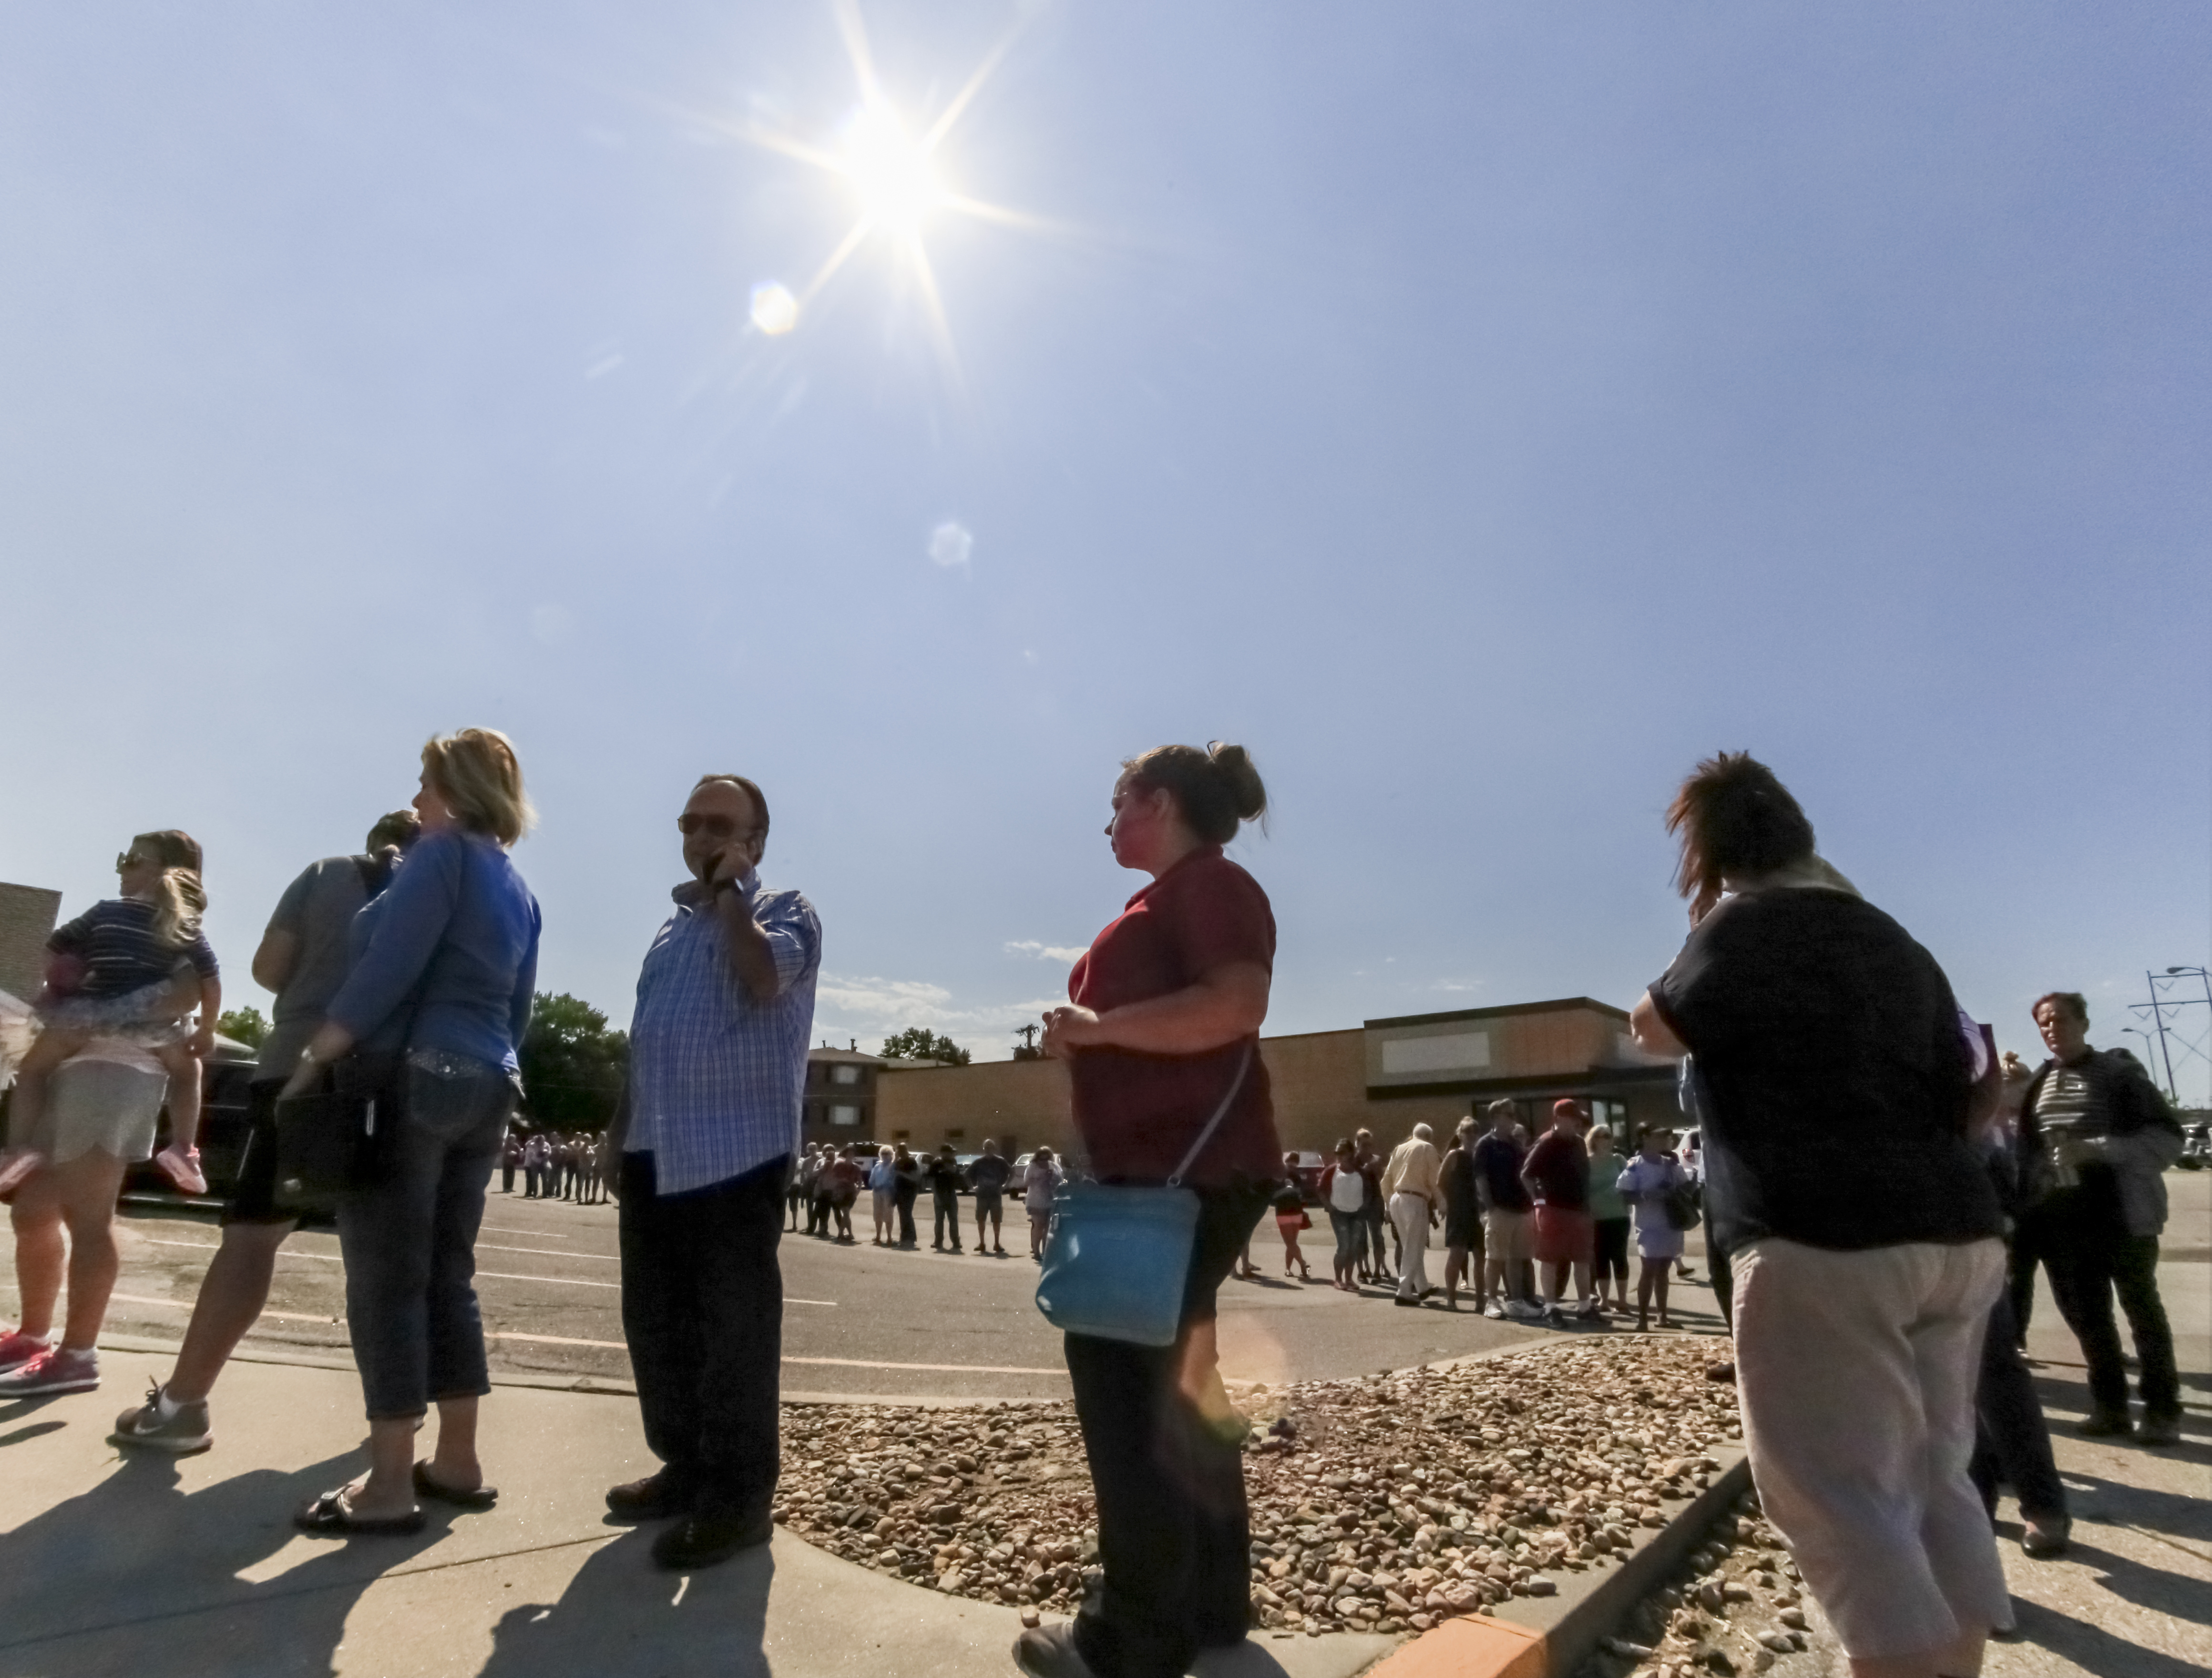 A line forms outside Mangelsen's, an arts and crafts store in Omaha, Neb., on Aug. 18, 2017, where a new shipment of solar glasses is about to be offered for sale. (Nati Harnik—AP)